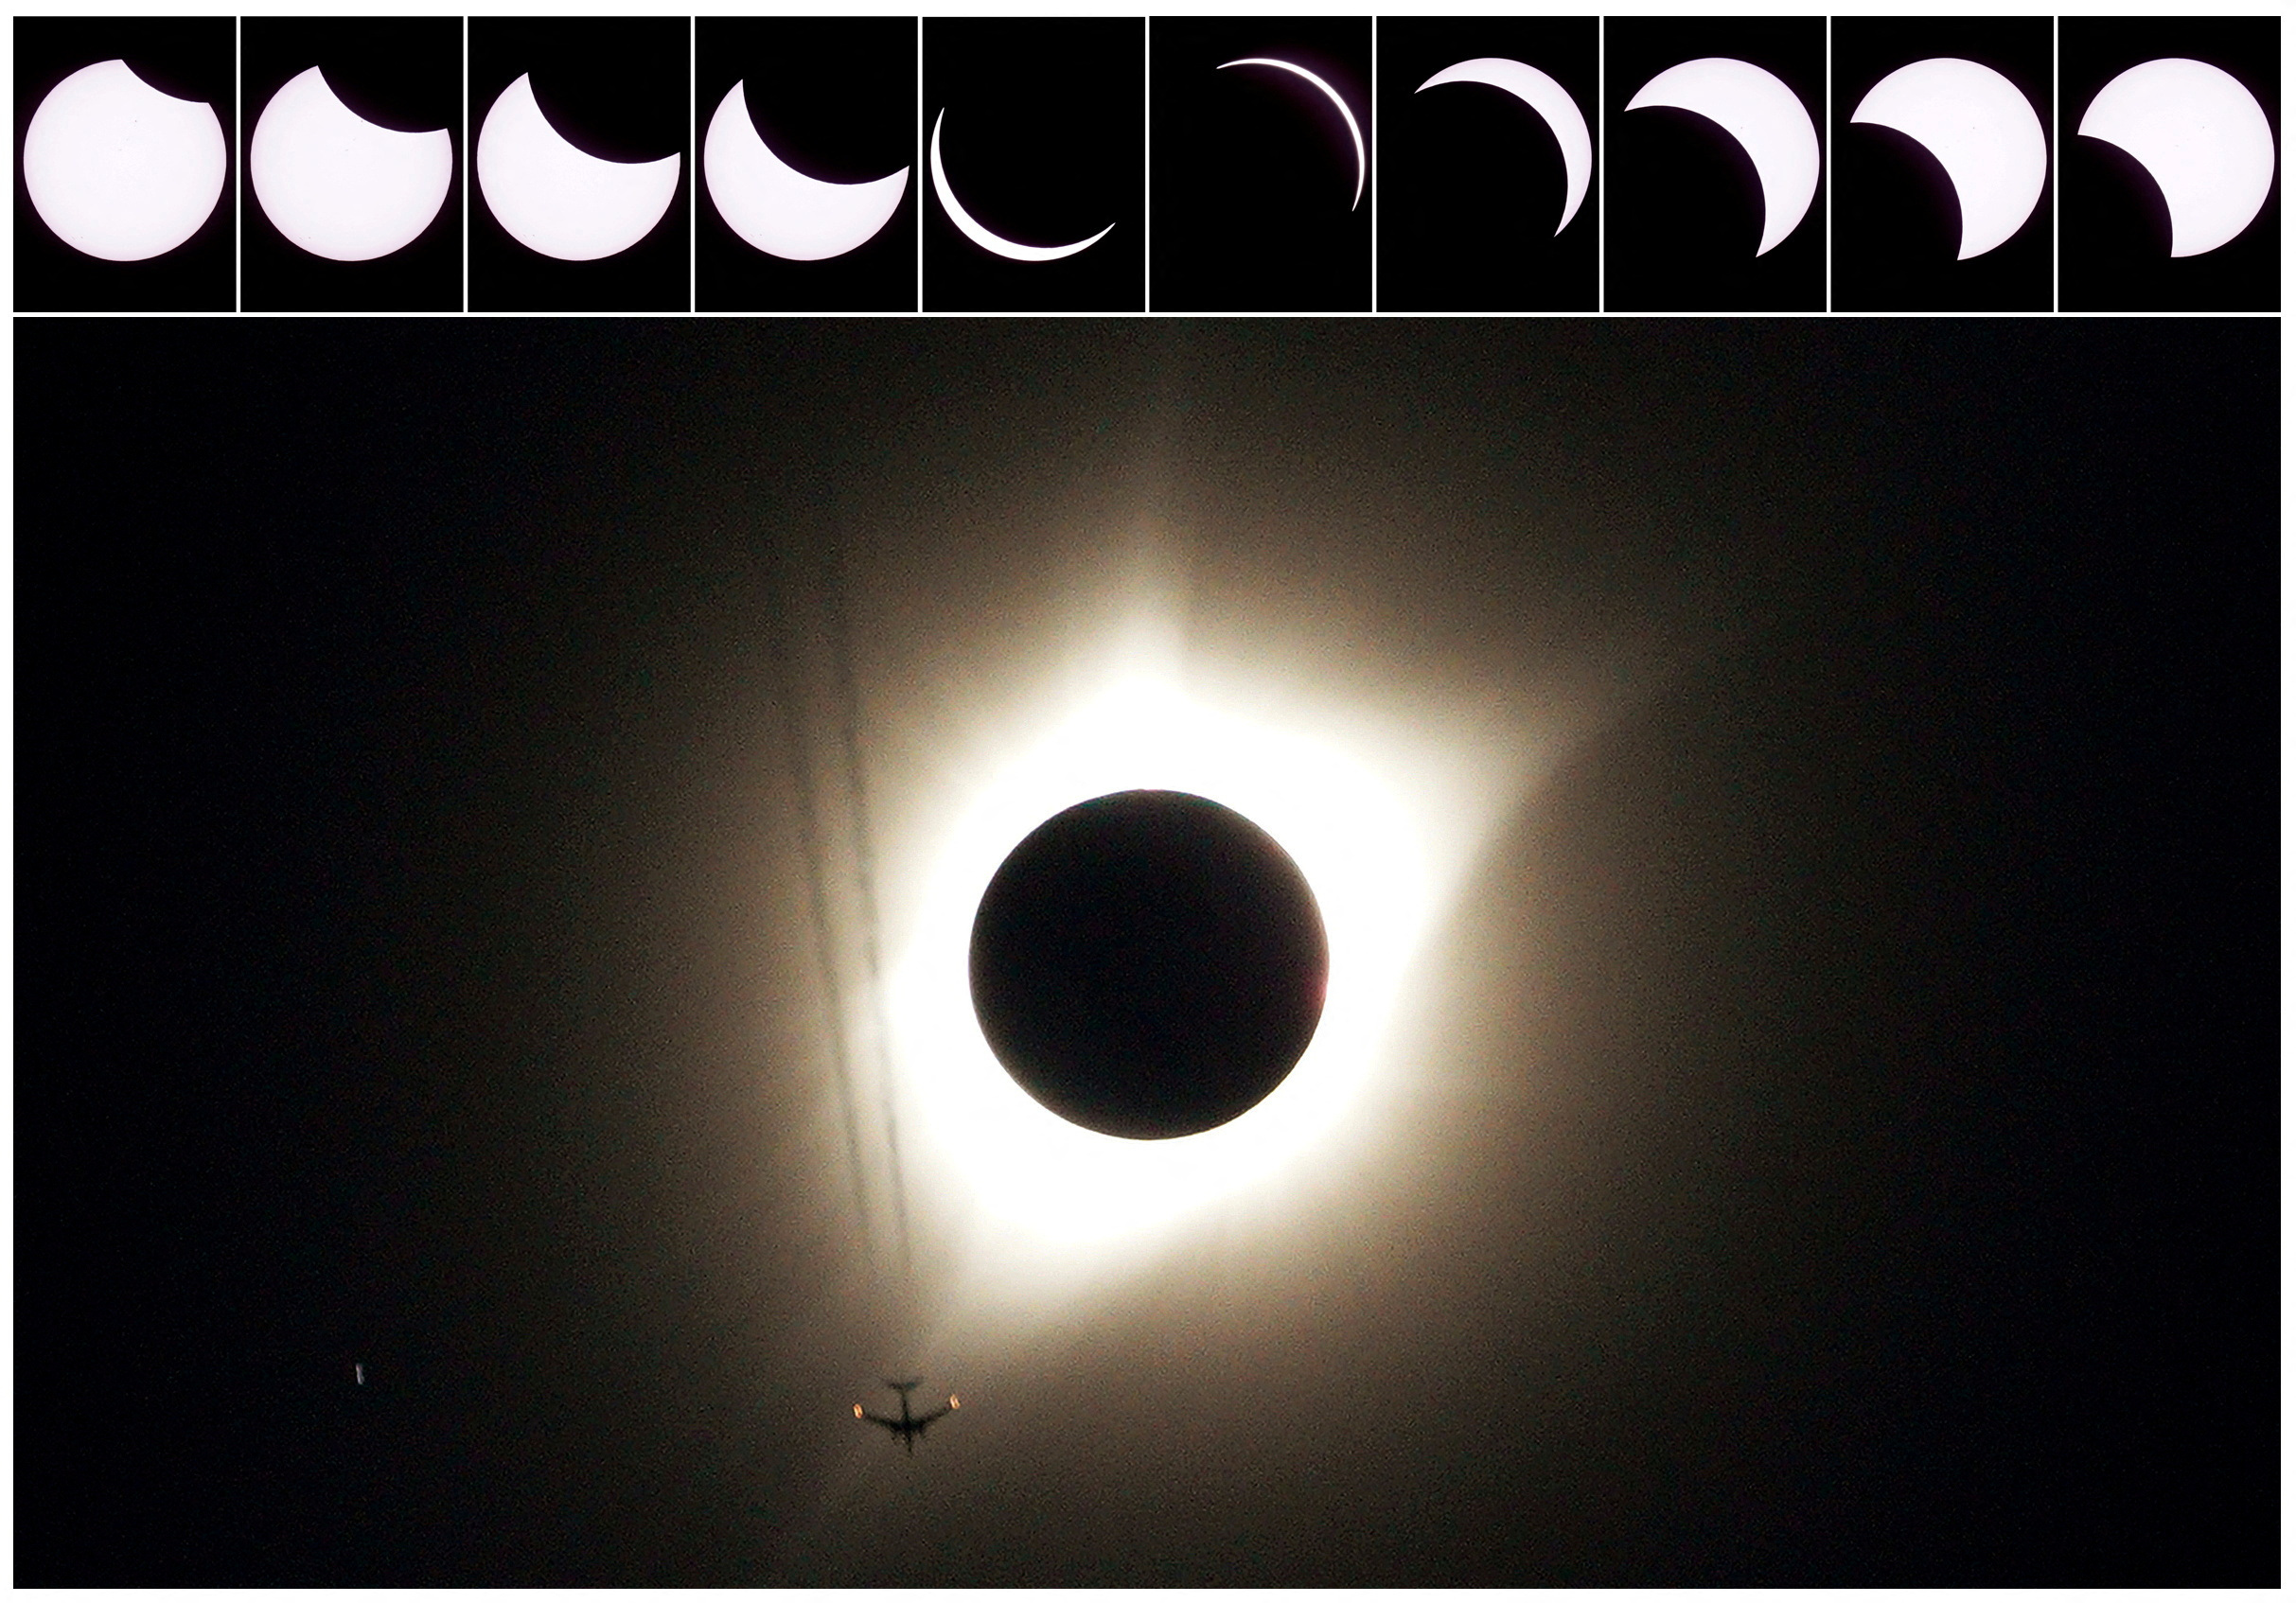 A 'Ring of Fire' solar eclipse is coming soon. Here's what you